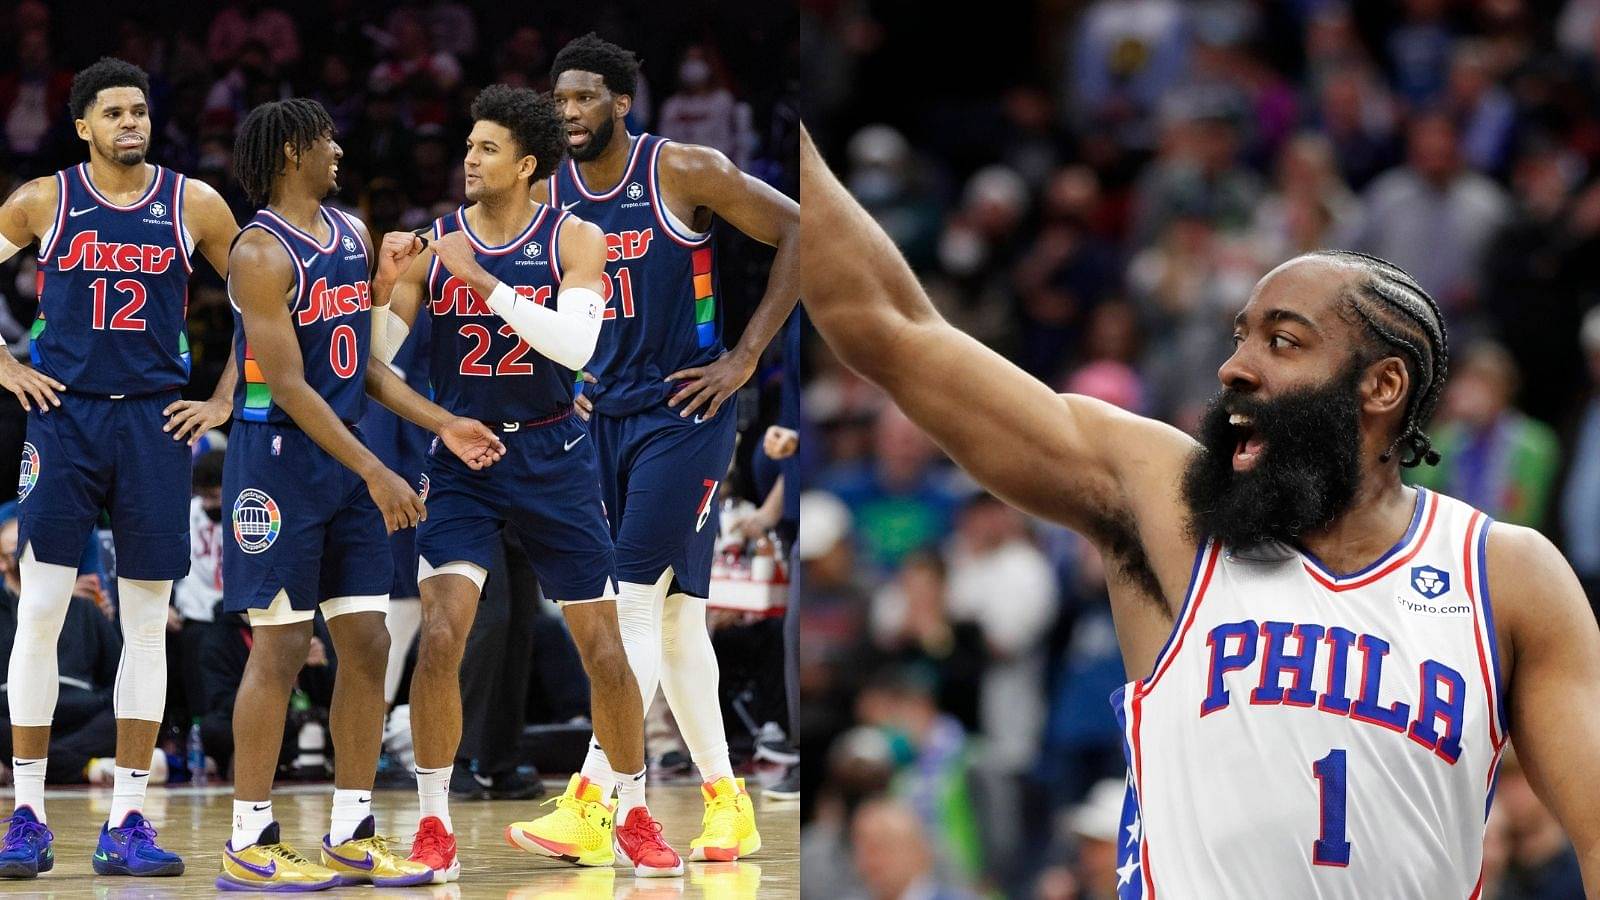 "Still amazed the Sixers got James Harden without losing Tyrese Maxey or Matisse Thybulle": Sports Illustrated columnist suggests Brooklyn Nets aren't really the winner of Harden-Simmons trade